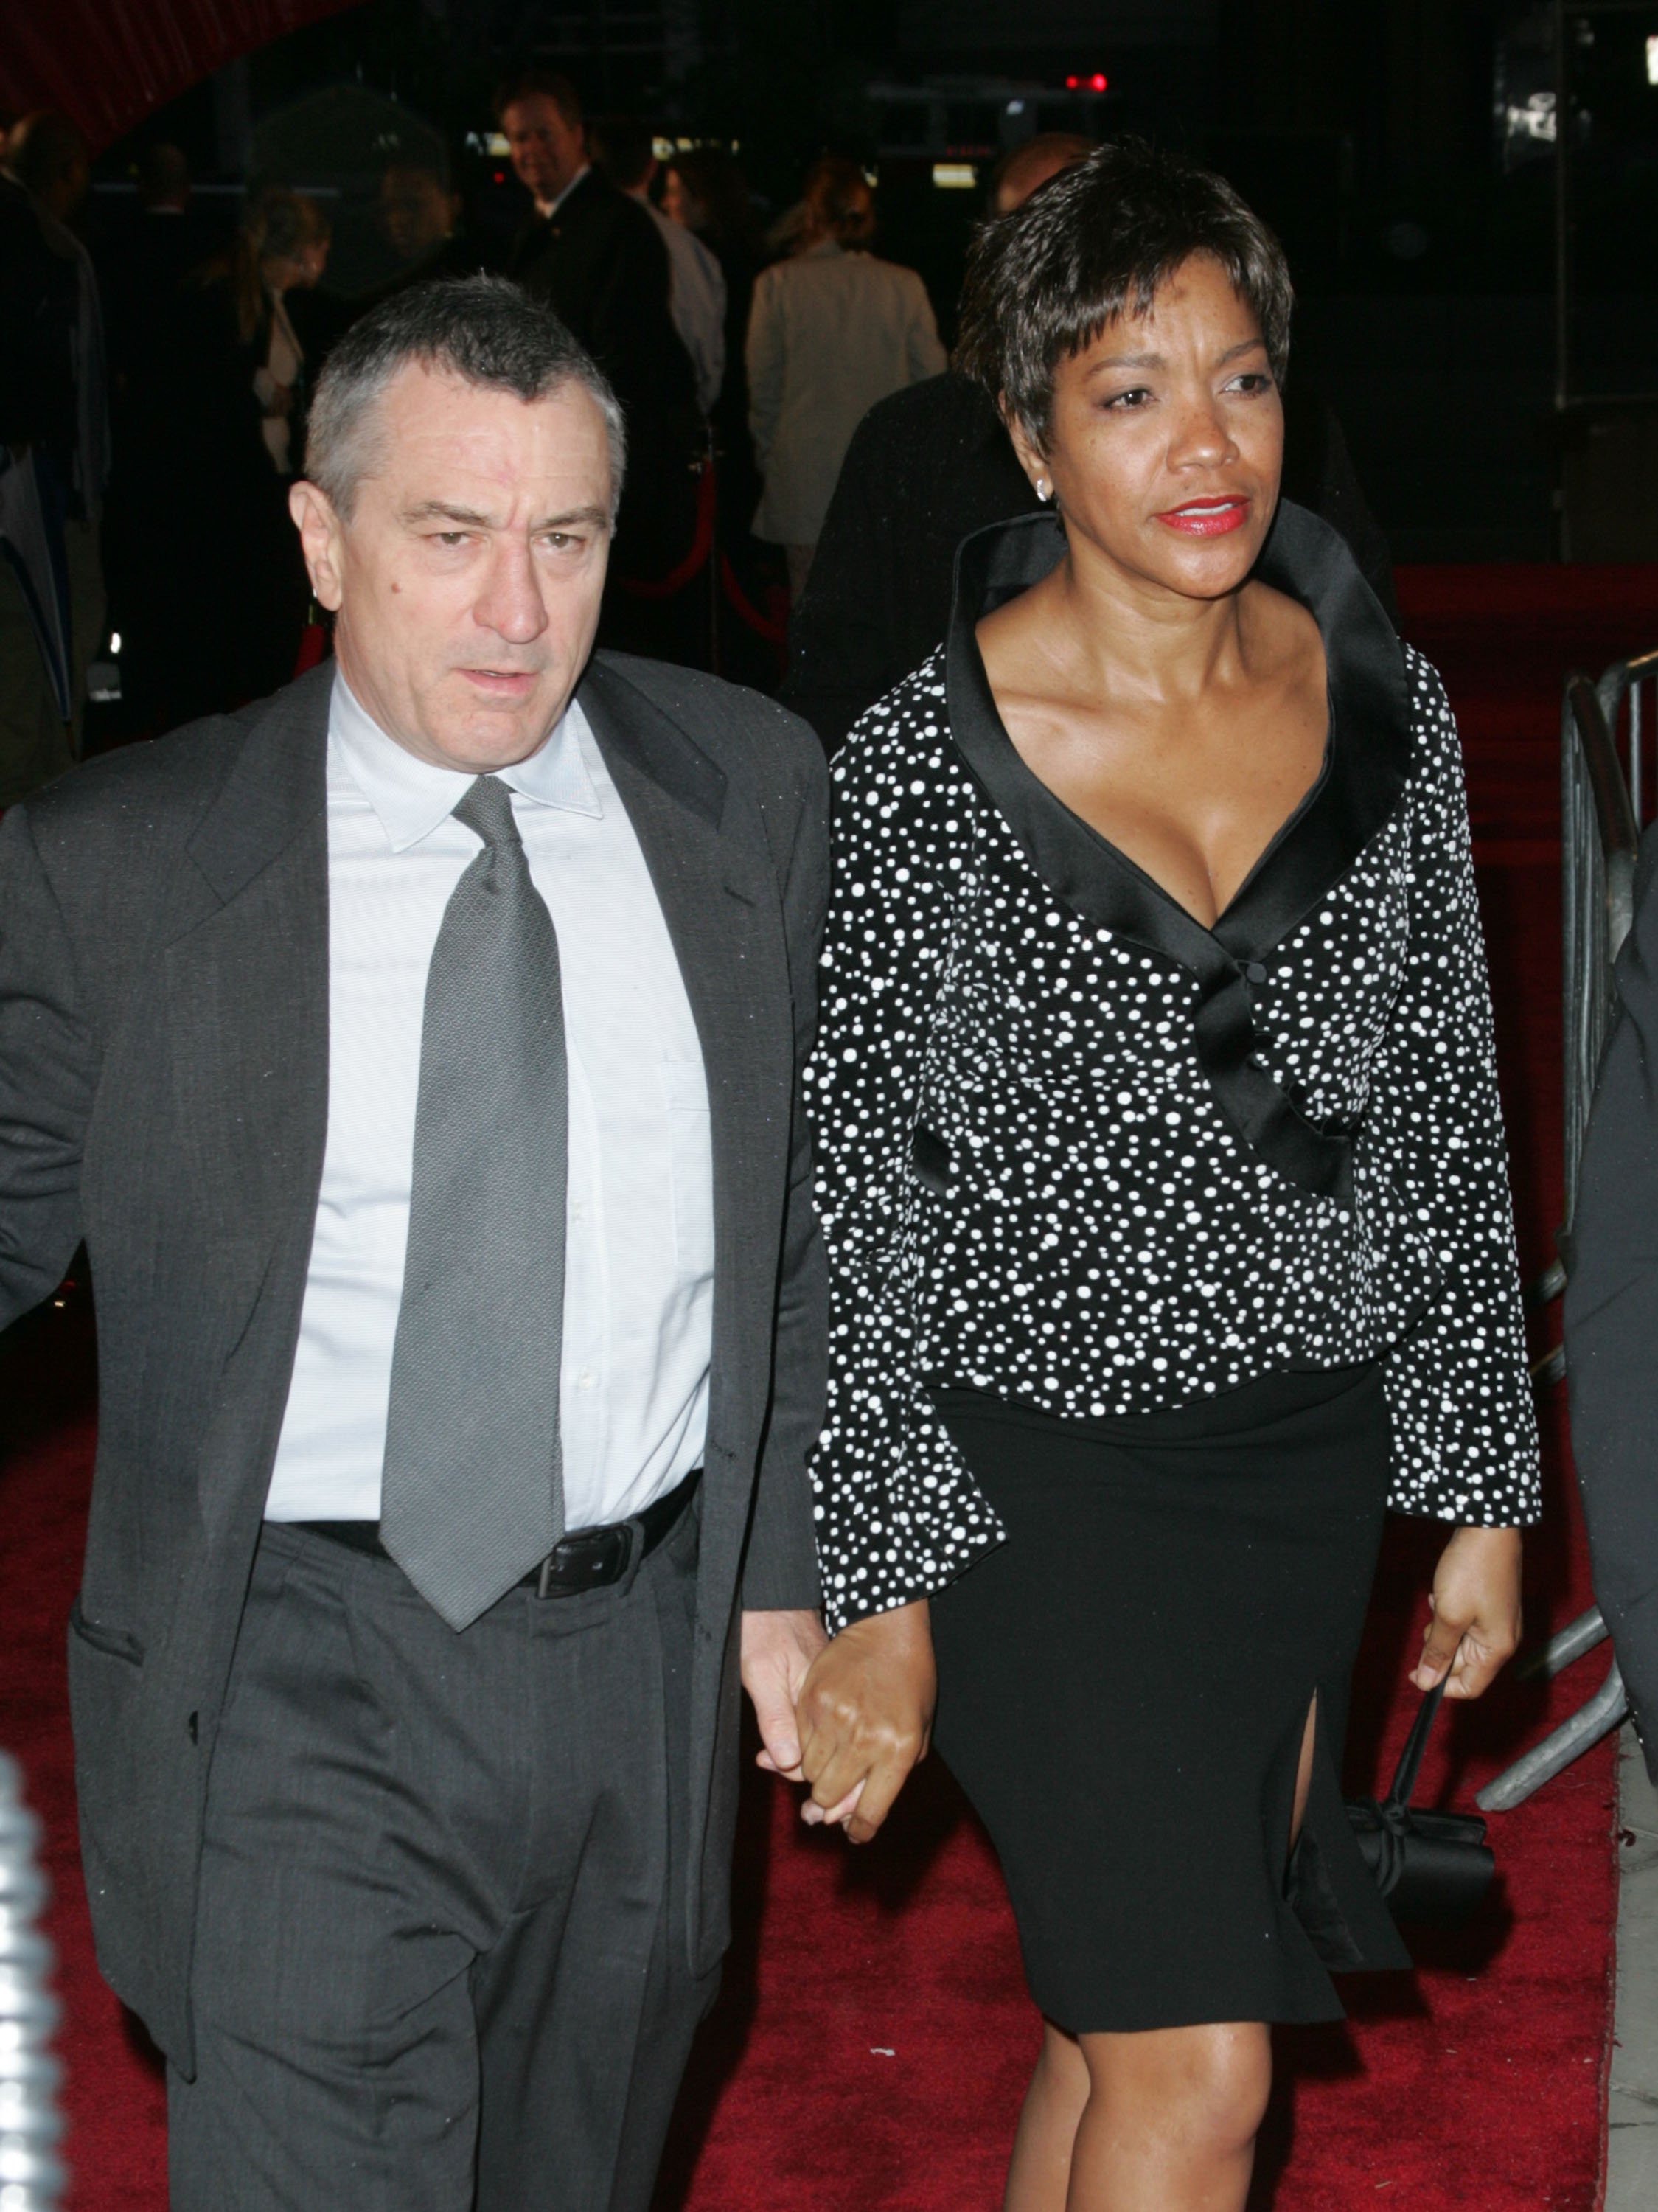 Robert De Niro and Grace Hightower during 3rd Annual Tribeca Film Festival - "Brotherhood" premiere at Tribeca Performing Arts Center in New York City | Source: Getty Images